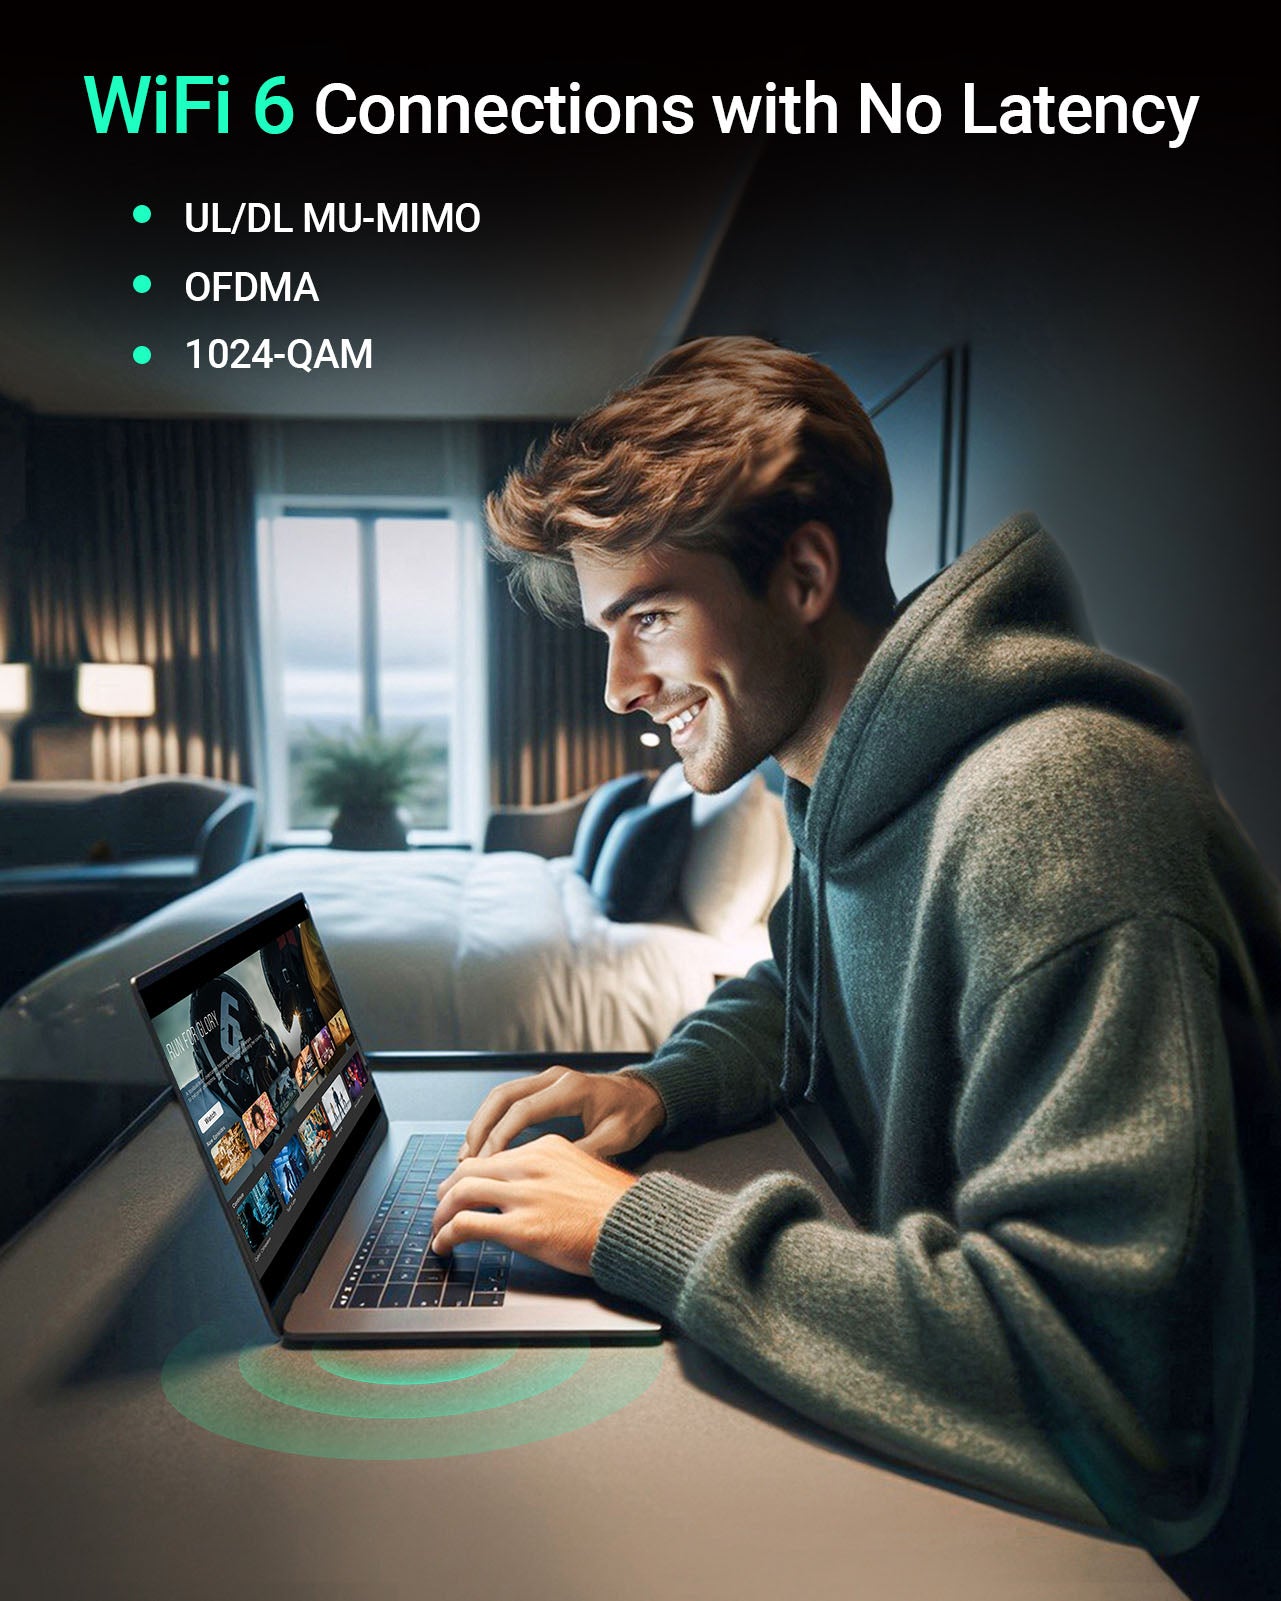 A Young Man Enjoys Fast WiFi Delivered by This M.2 WiFi Card Improved WiFi Experience with the Latest WiFi 6 Technologies such as UL/DL MU-MIMO OFDMA and 1024-QAM